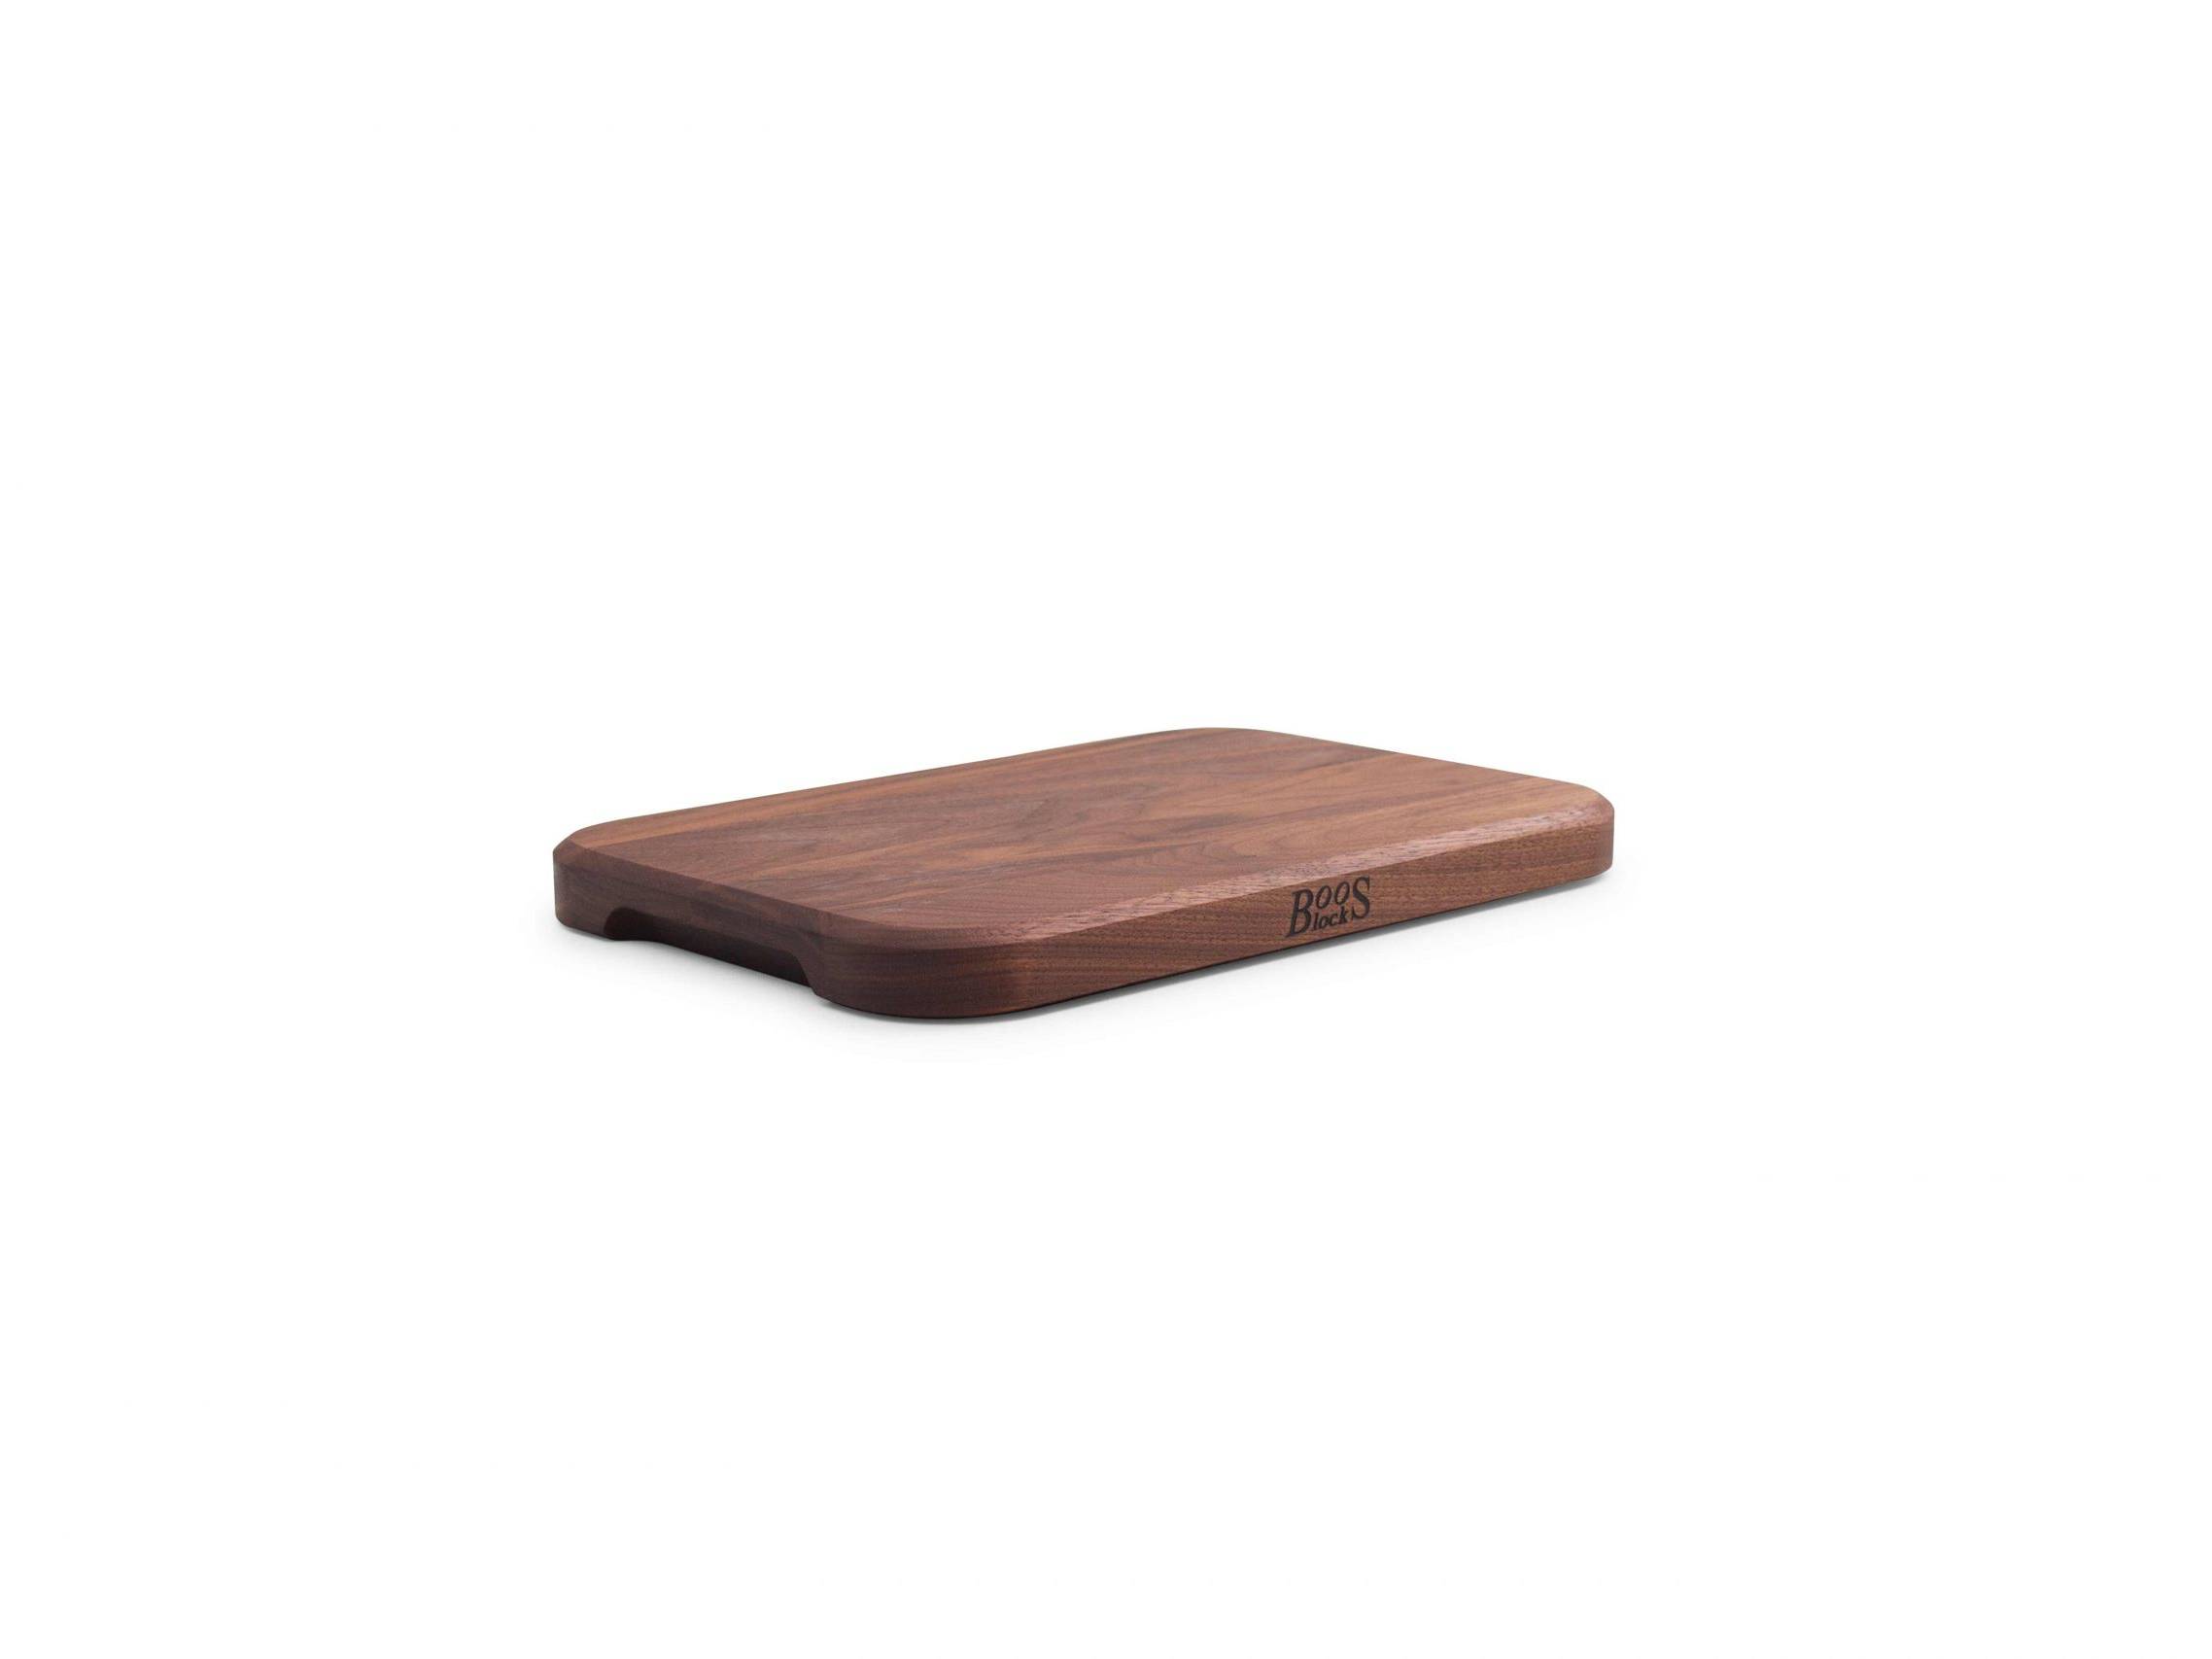 Chop-N-Serve Black Walnut chopping board with recessed grip; can be used on both sides 15